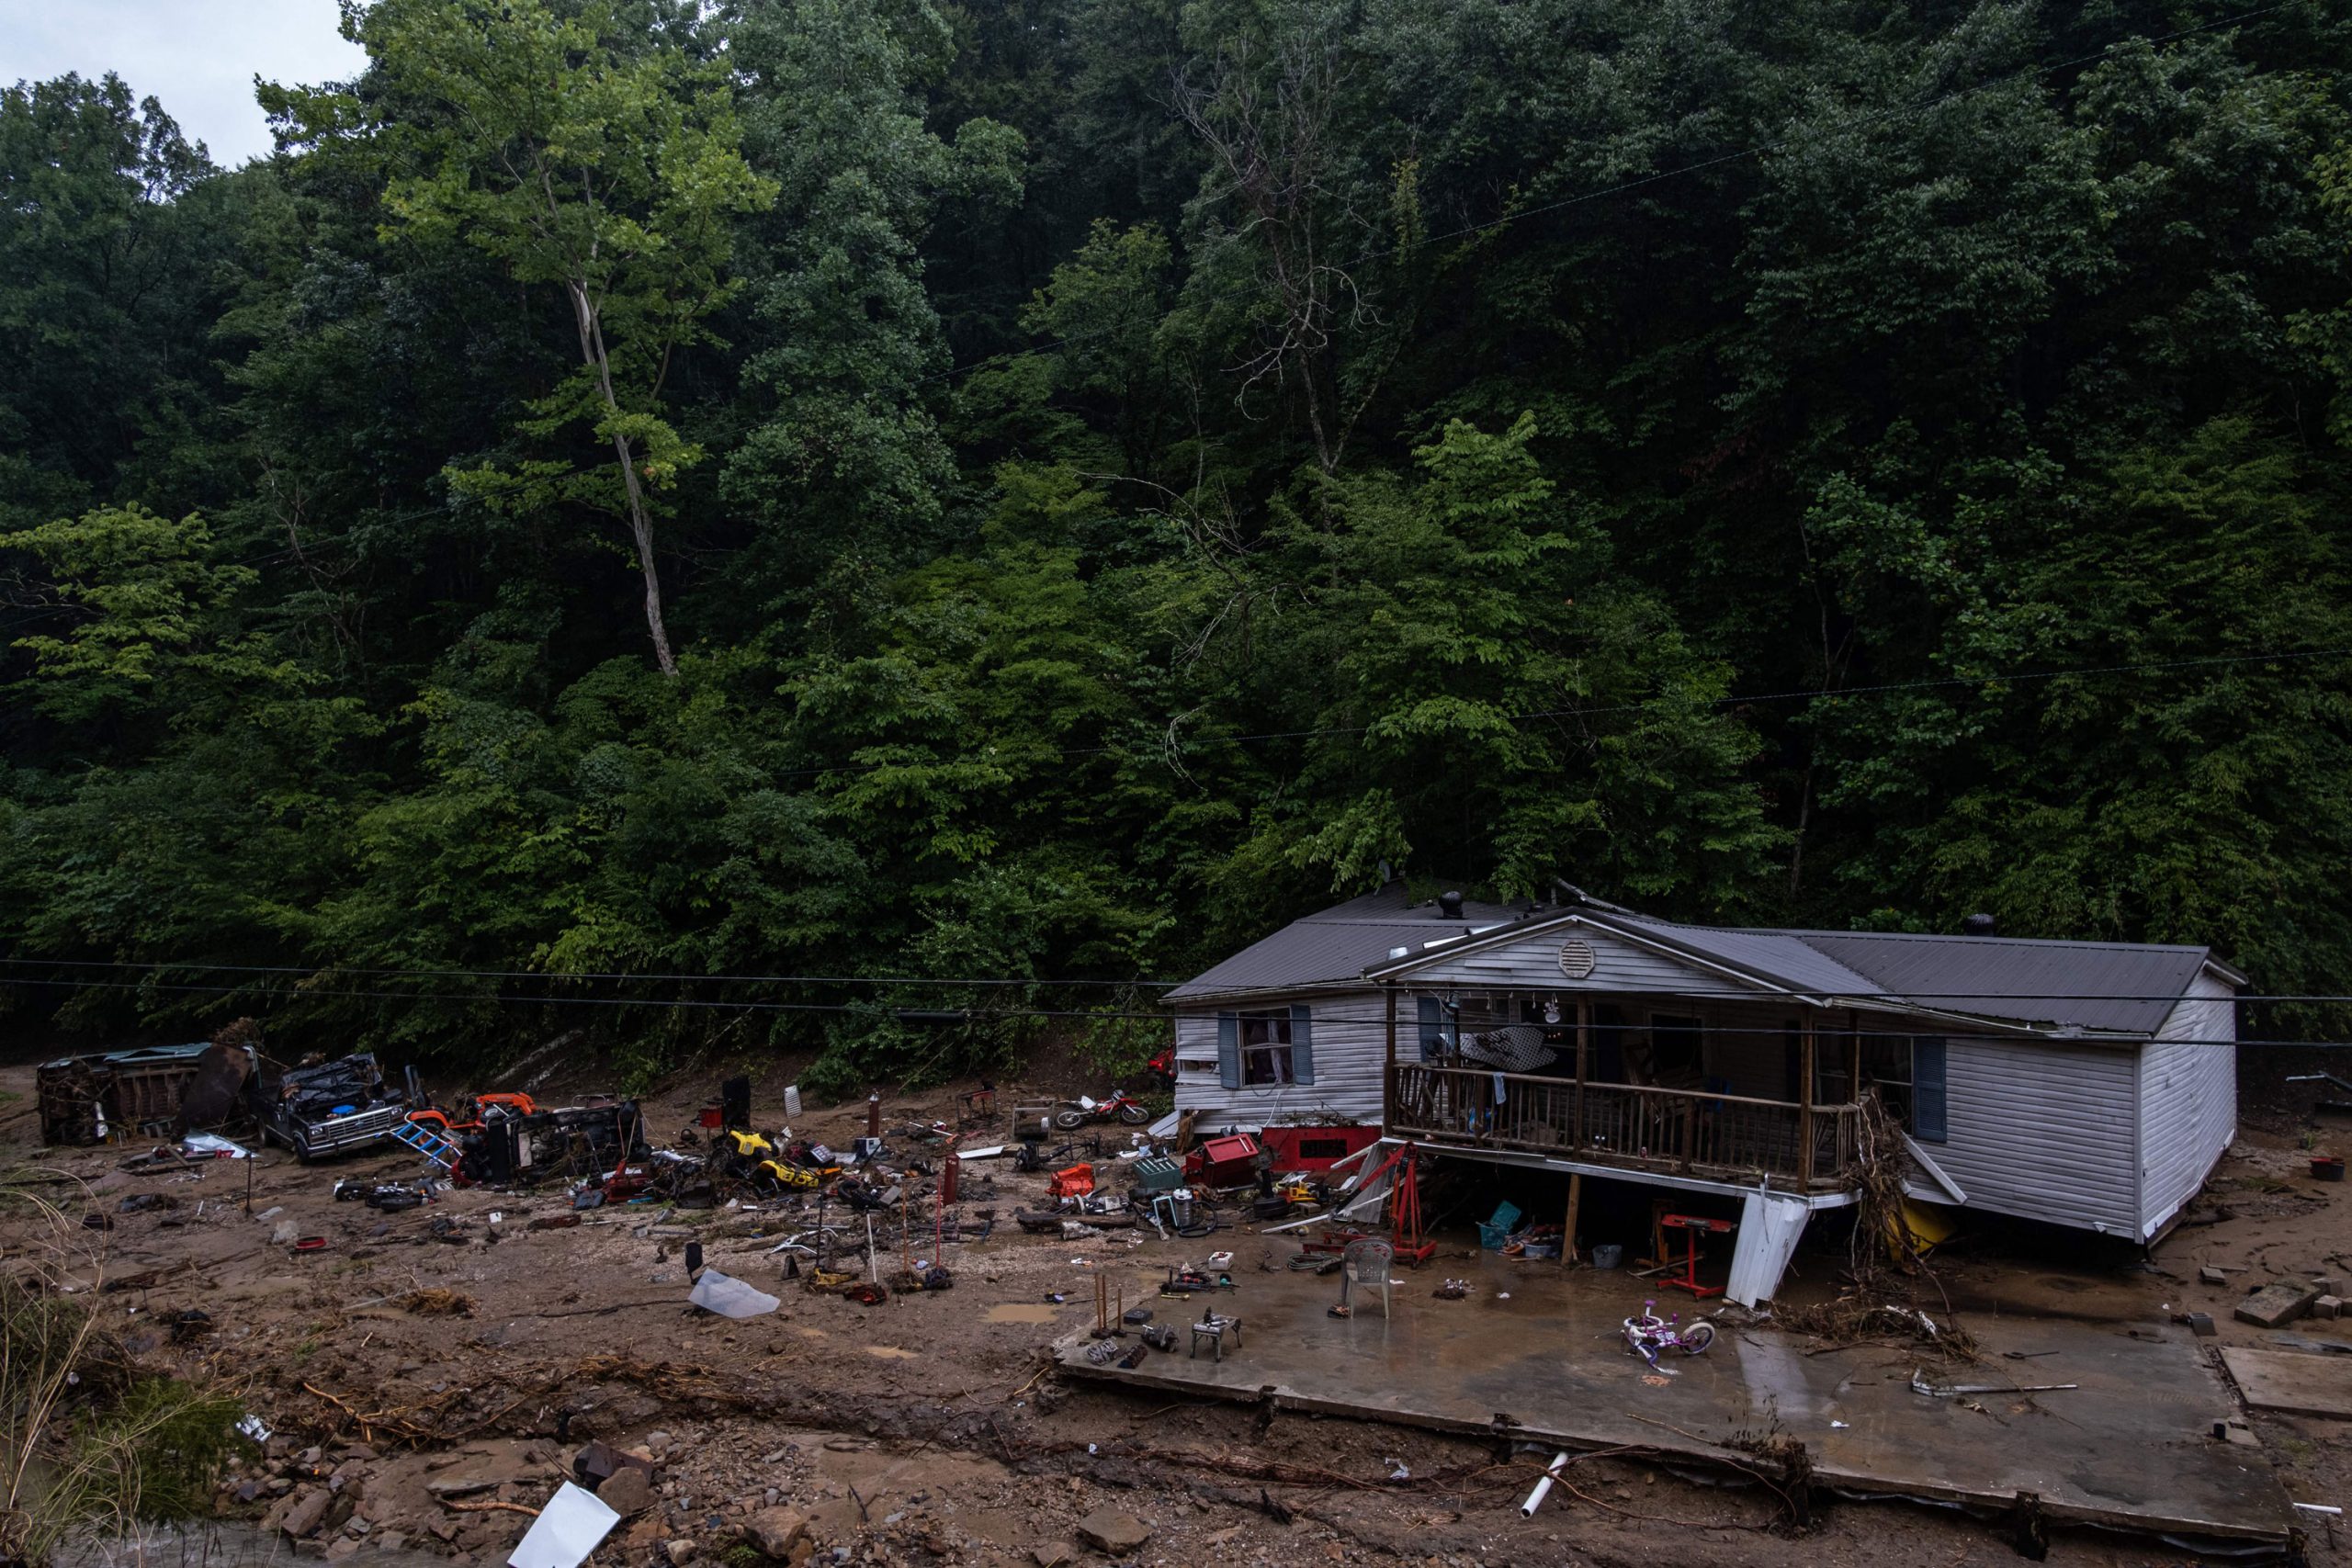 Debris surrounds a badly damaged home near Jackson, Kentucky, on July 31, 2022, after historic floo...